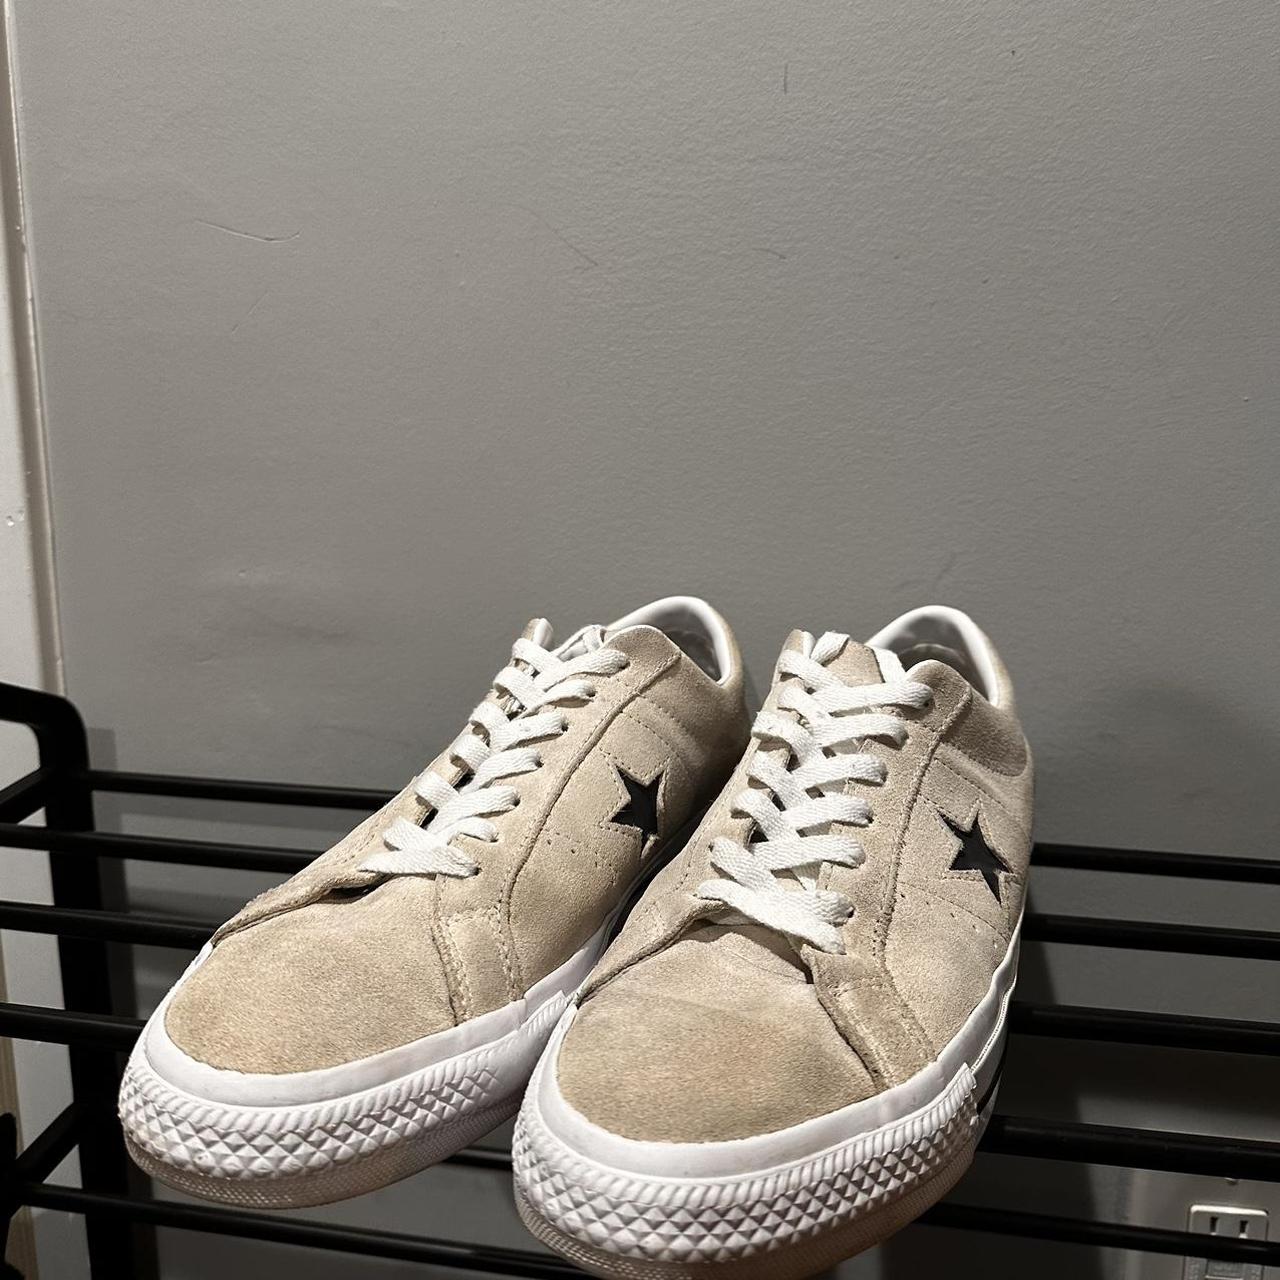 Converse Men's Cream and White Trainers | Depop